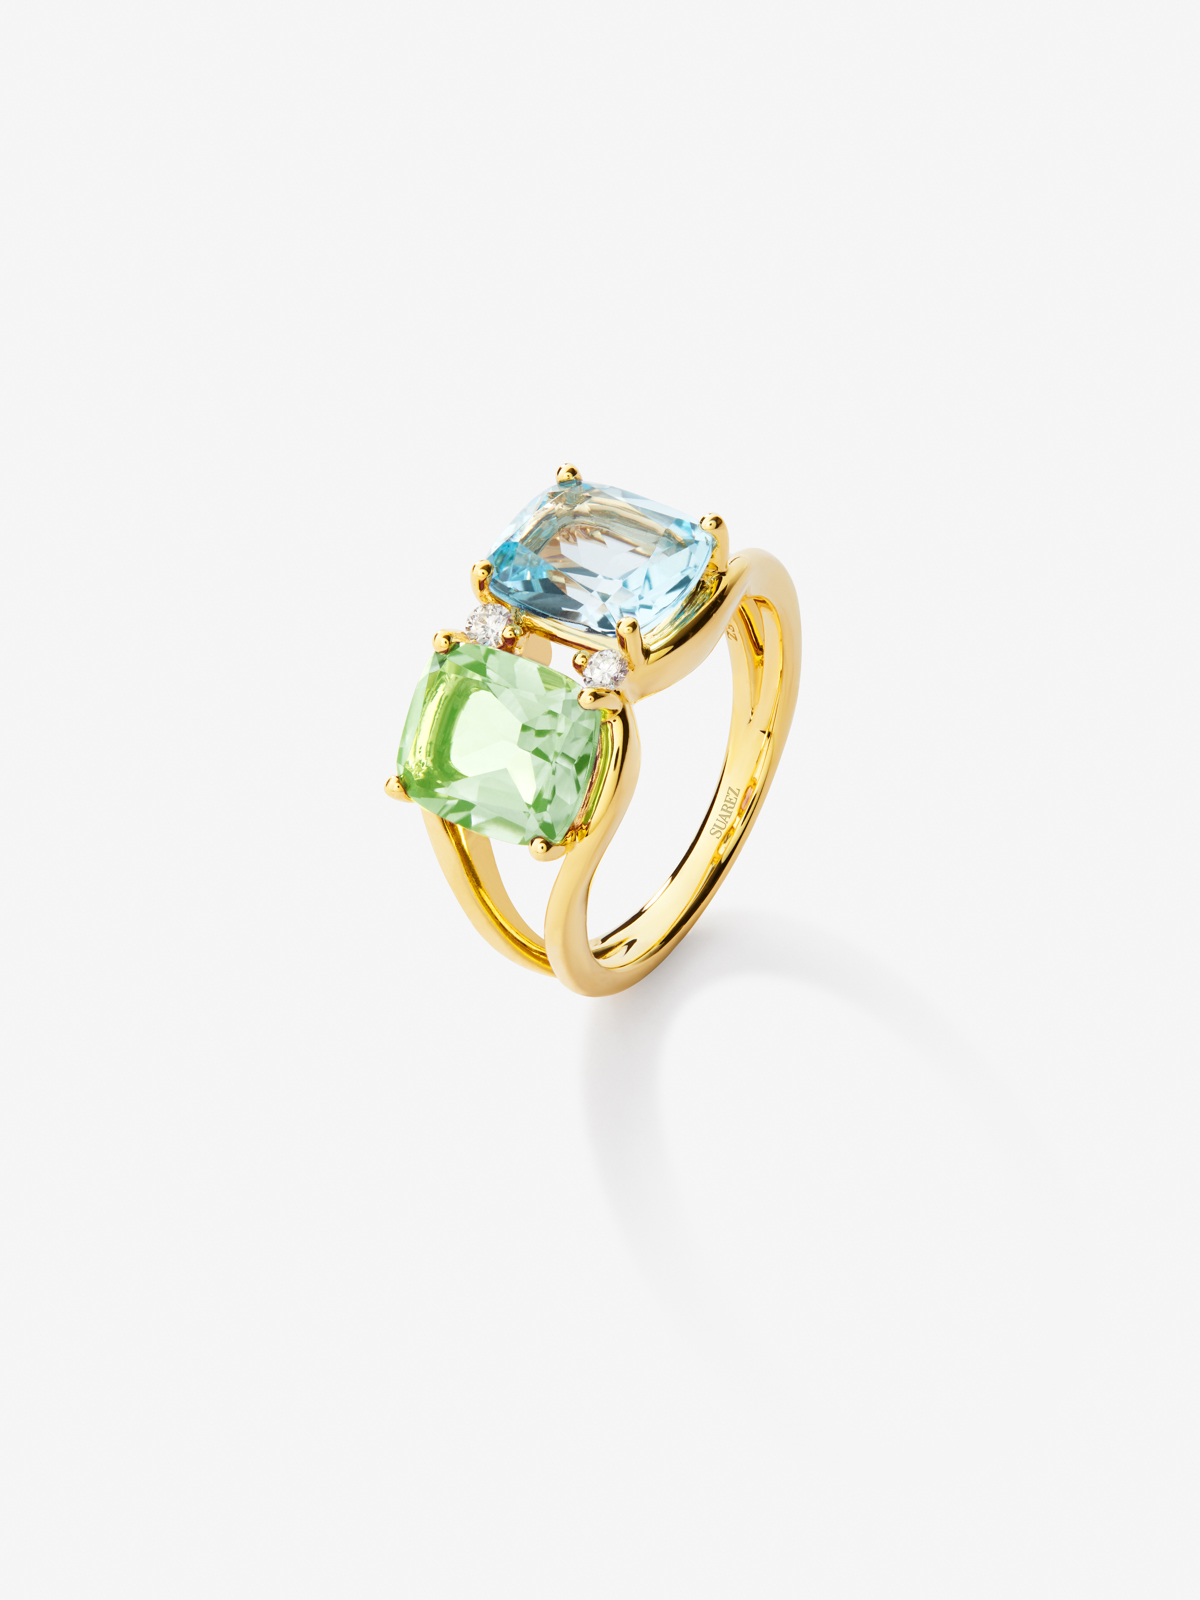 18K yellow gold ring with 2.75 cts blue Sky topaz, 2 cts green amethyst in Cushion and white diamonds in a brilliant size of 0.06 cts